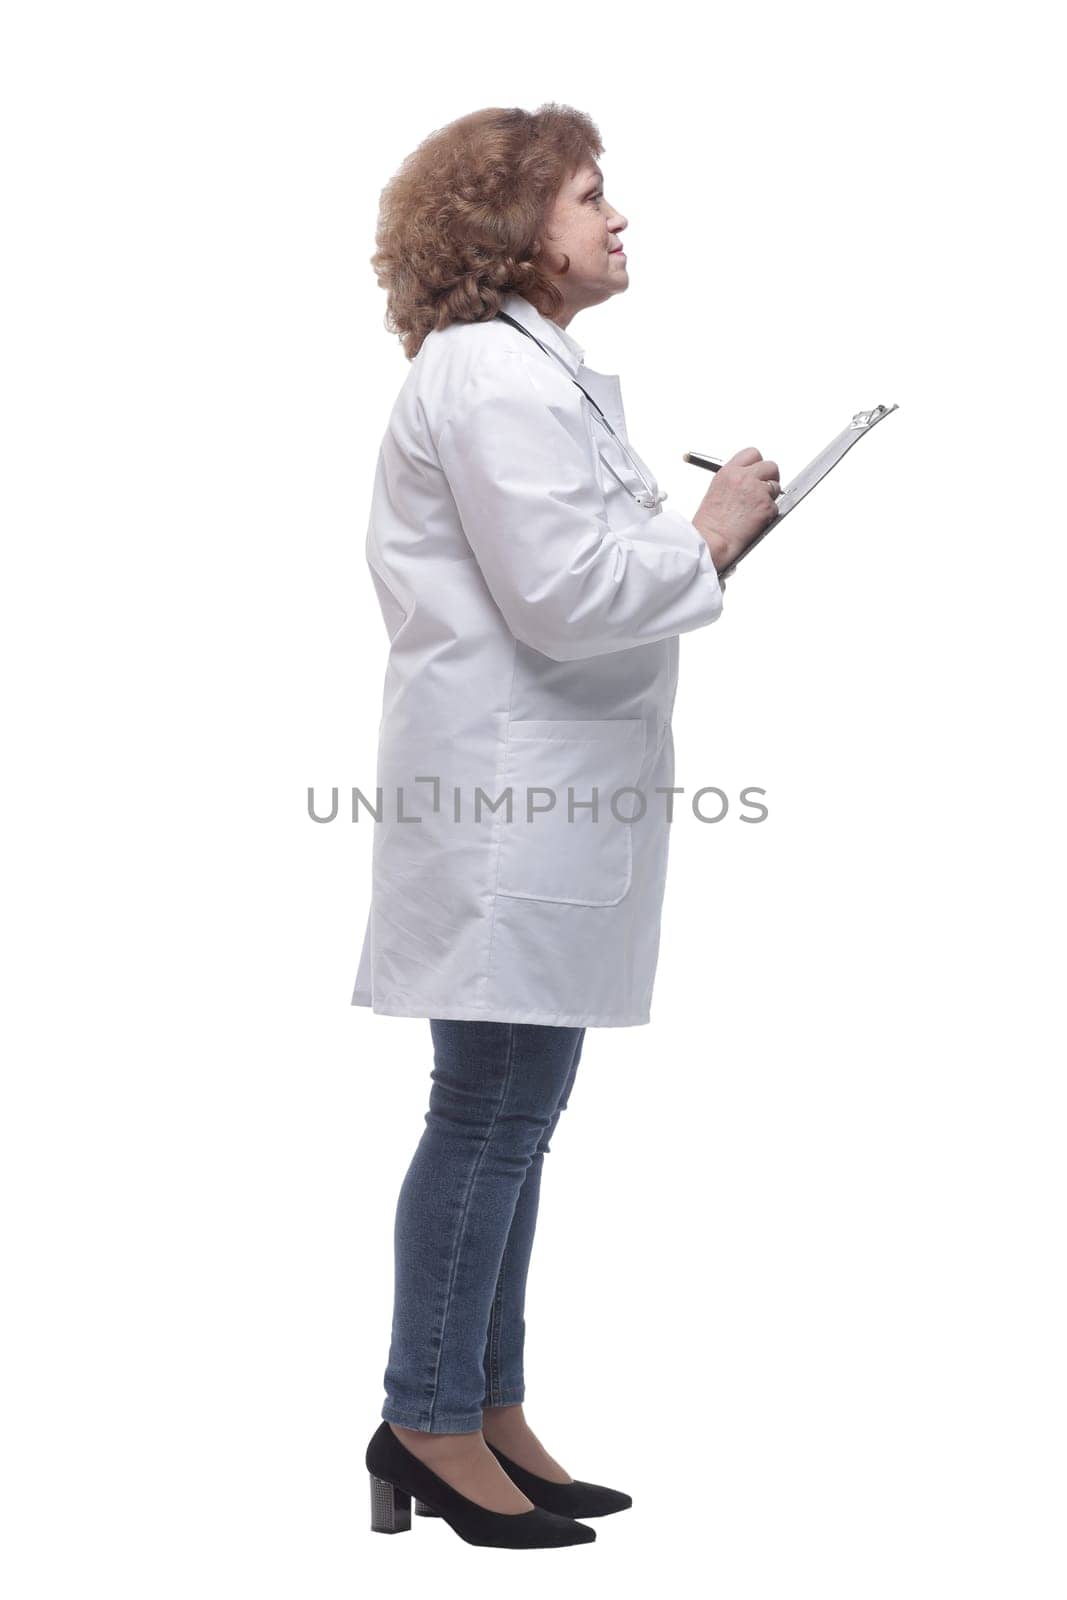 in full growth. therapist is making notes in the clipboard. isolated on a white background